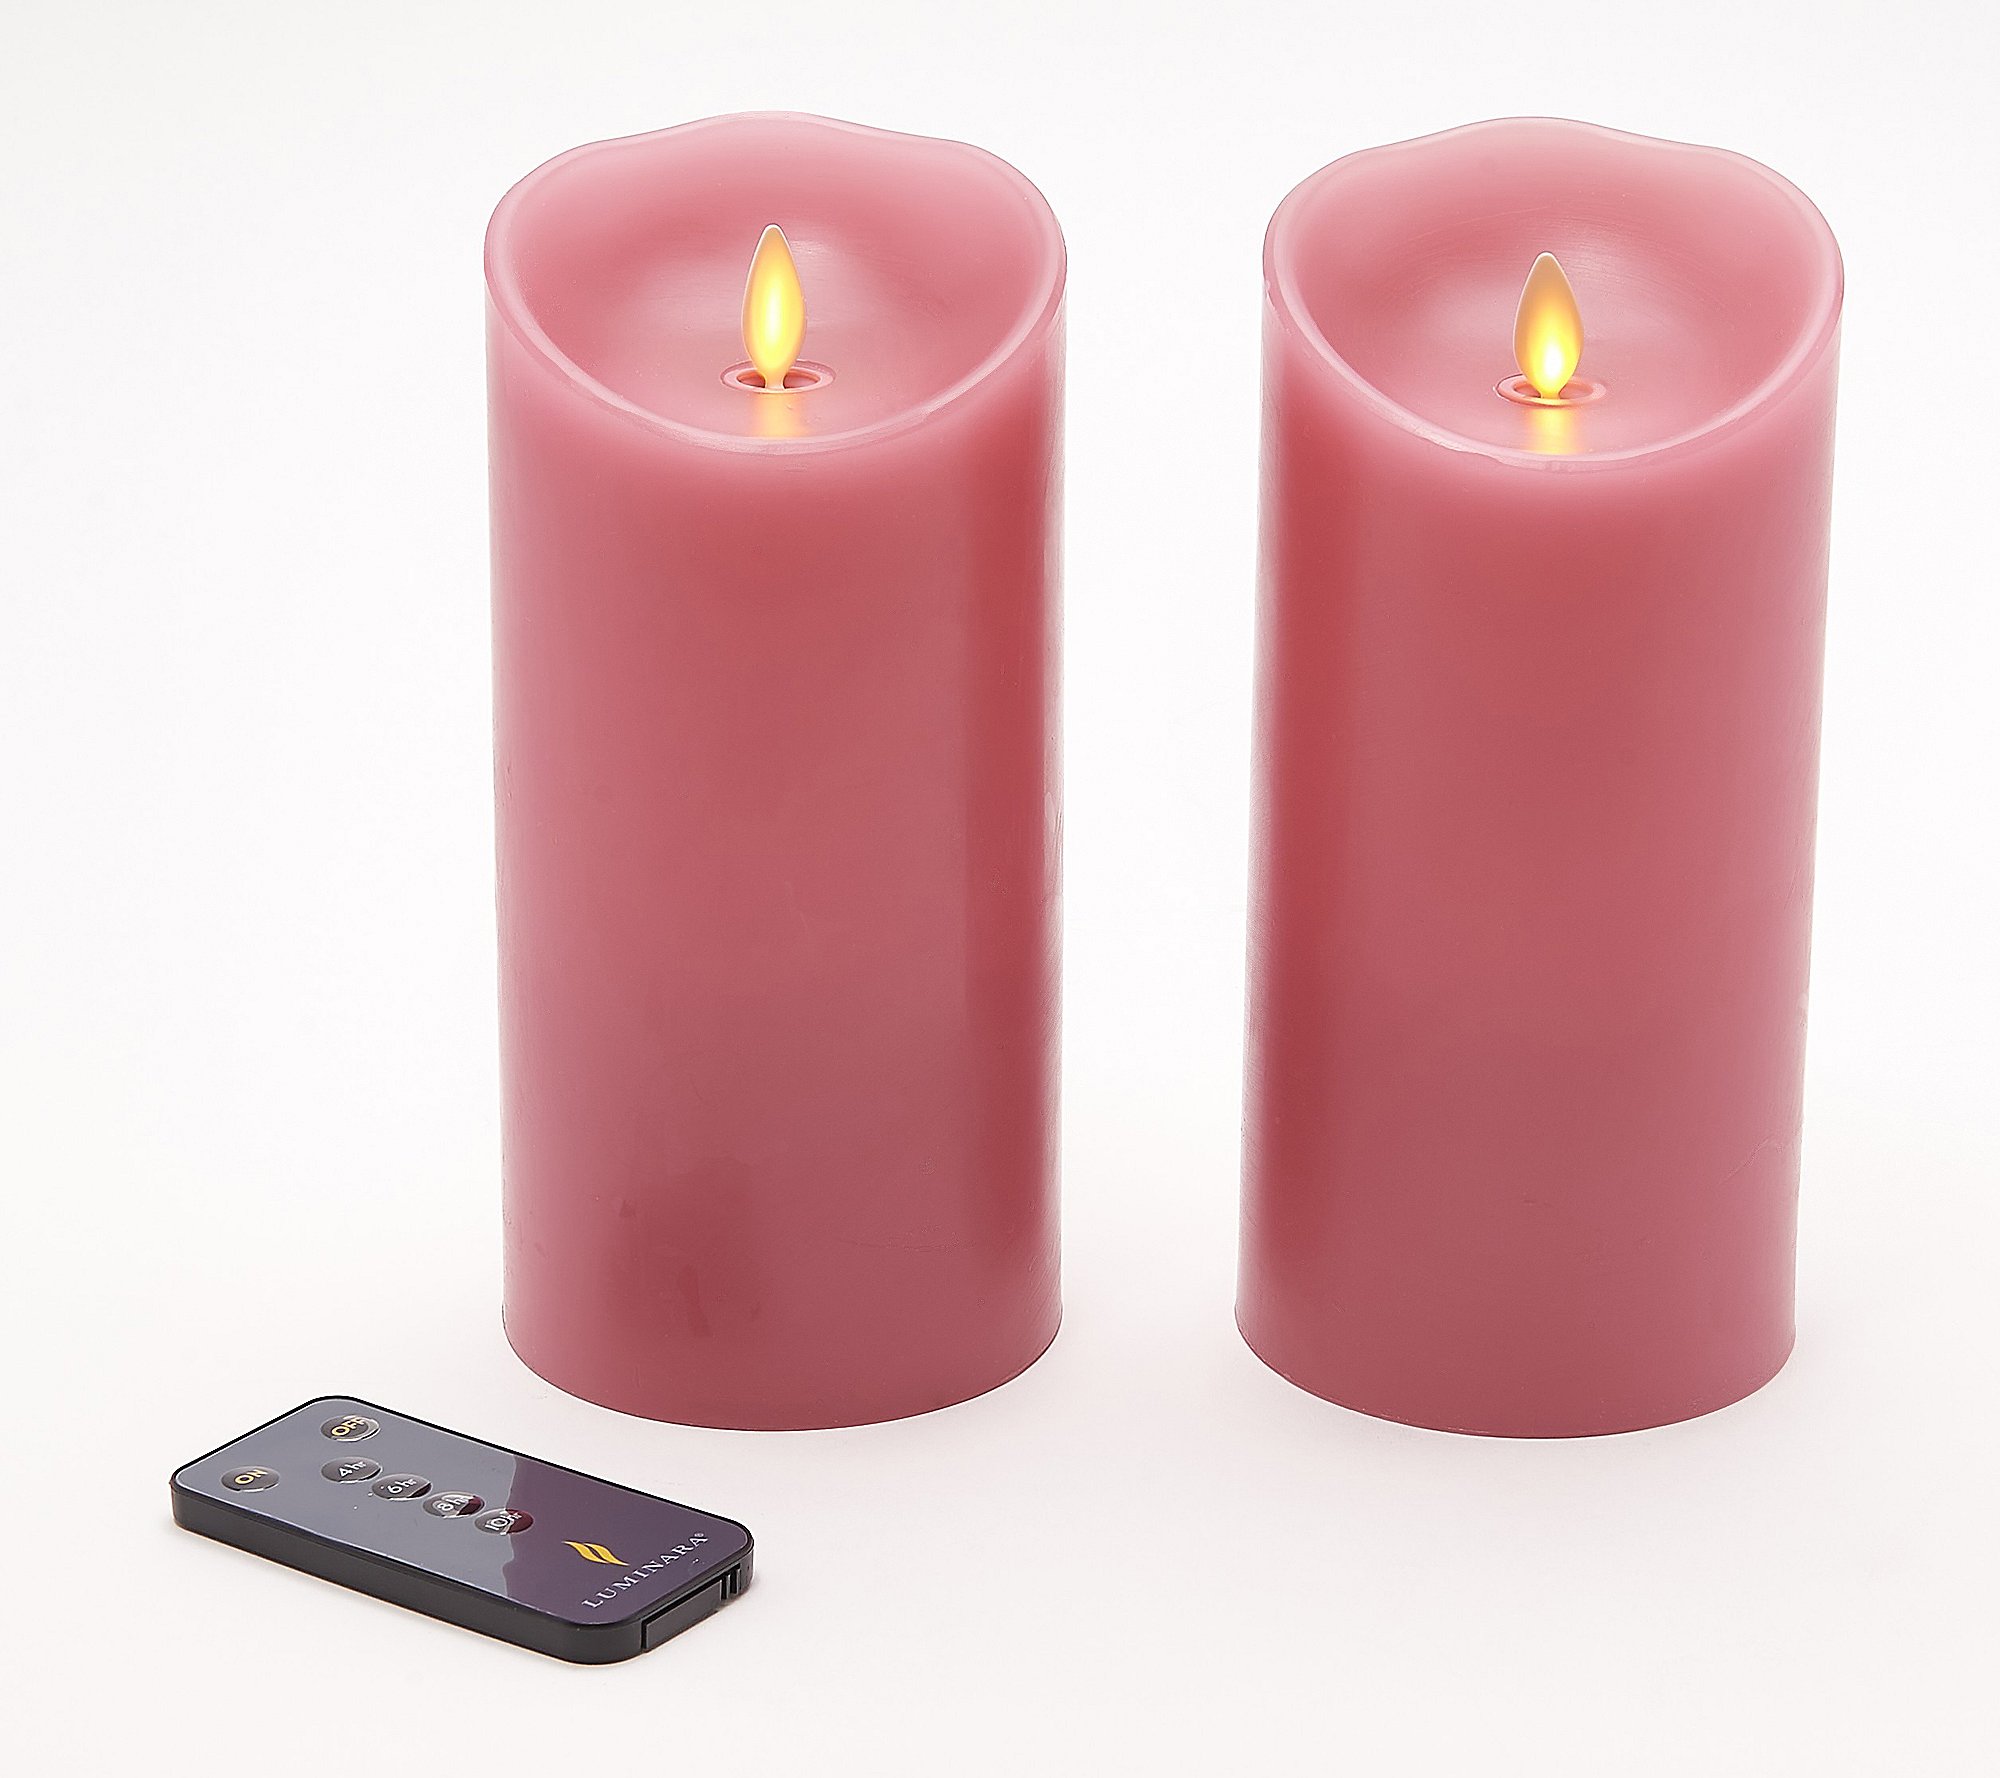 Luminara Flameless Flicker Led Candle Cinnamon Battery 3.5" x 9" with Remote 